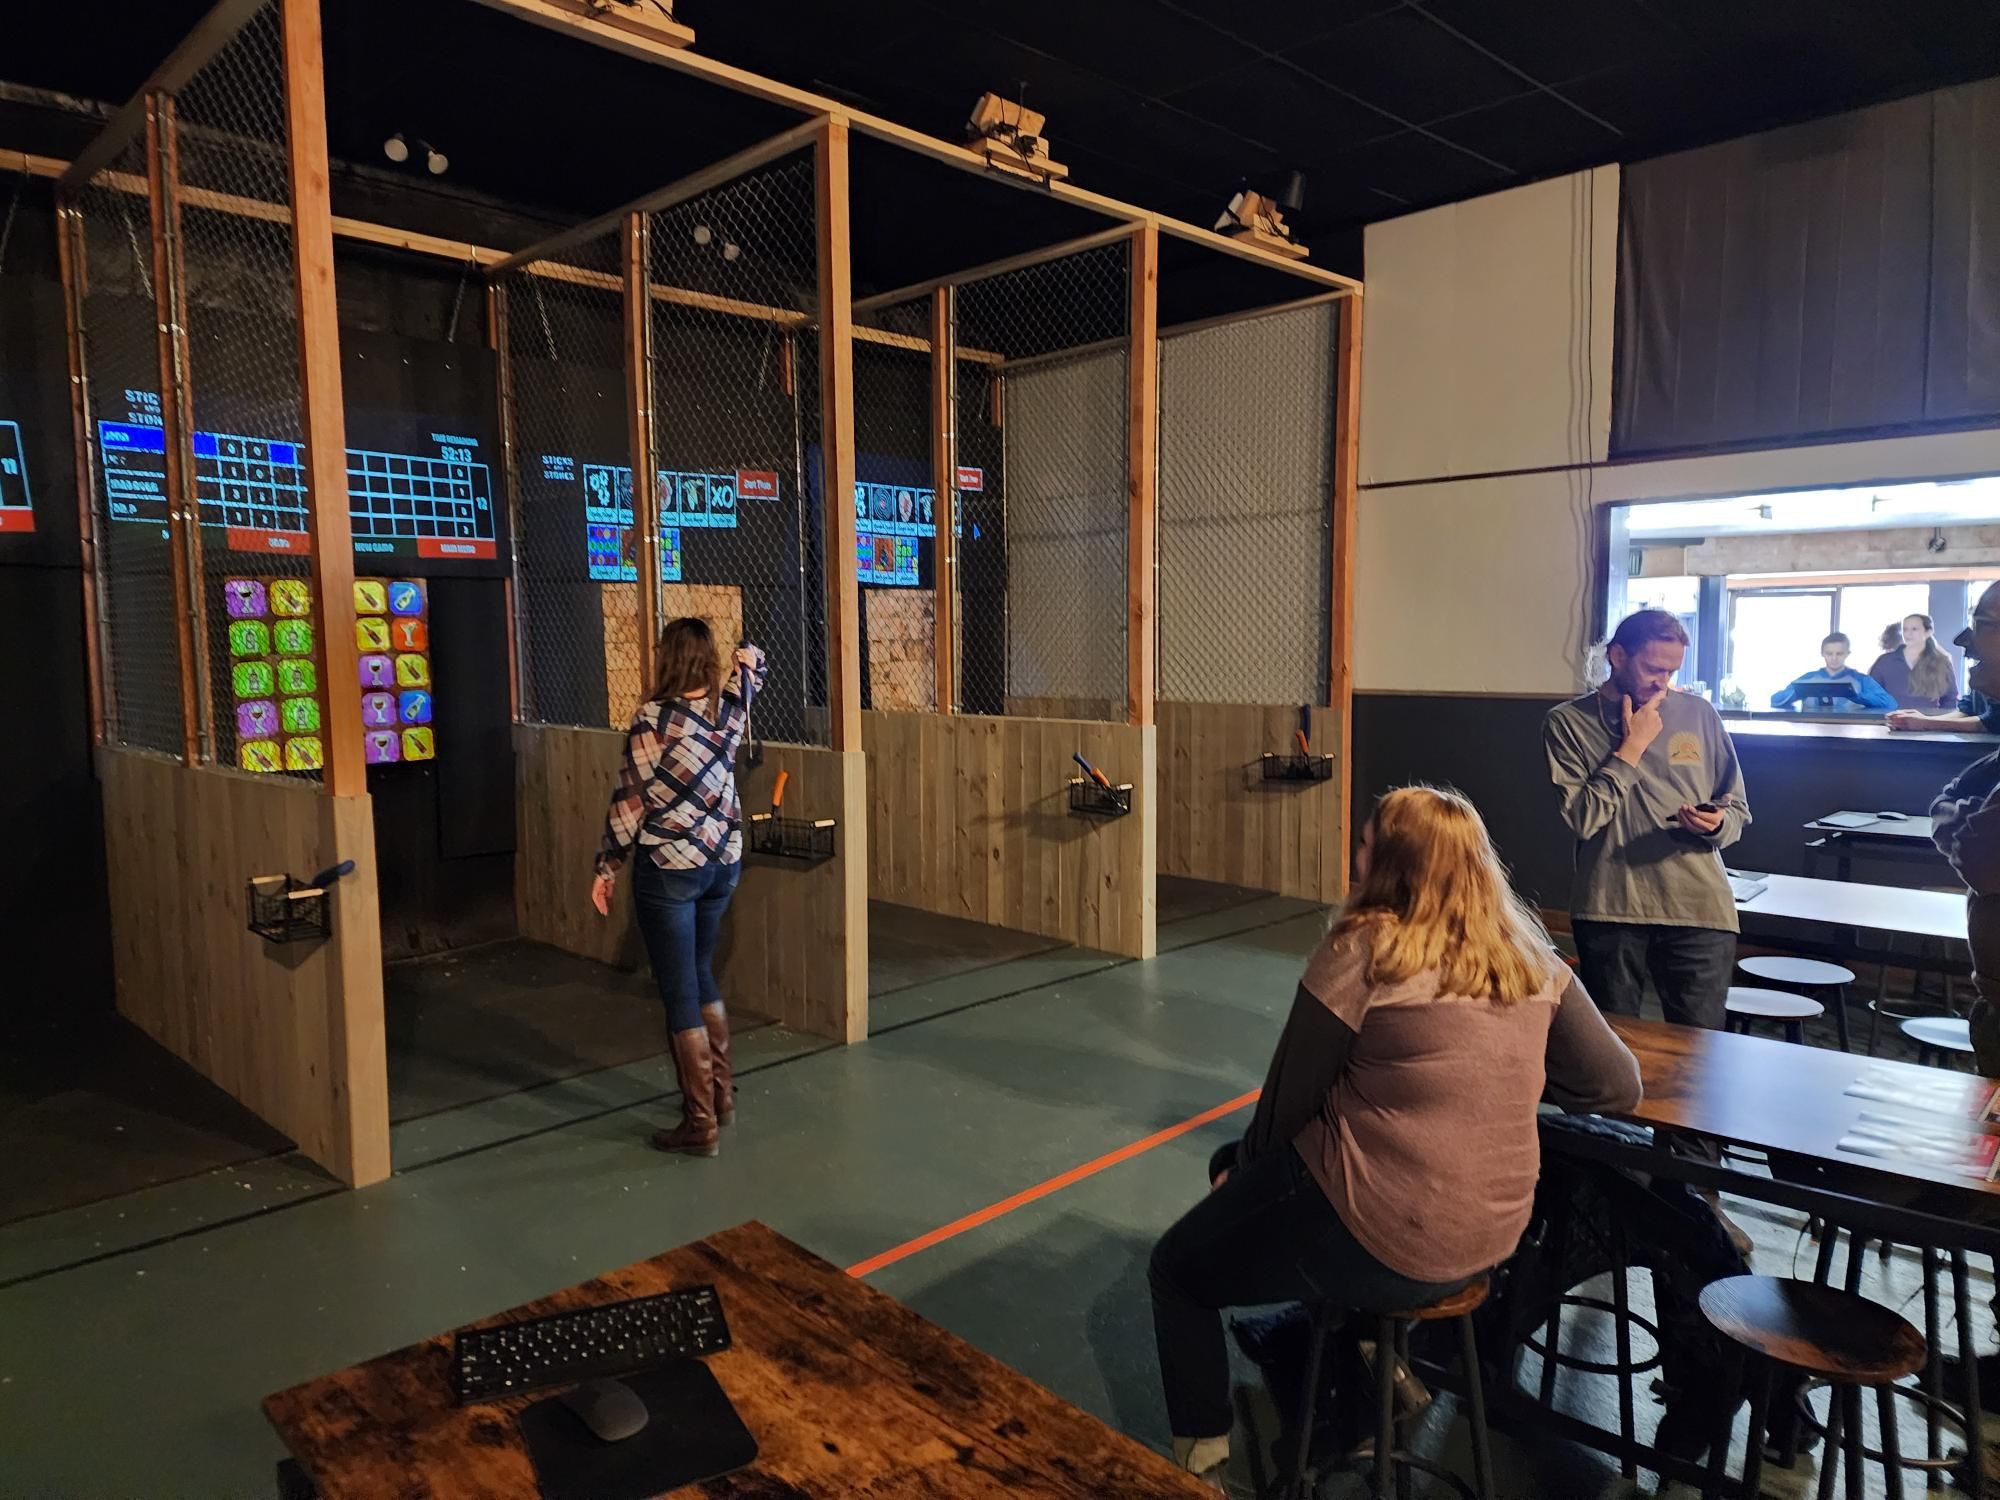 ATR Company Event at Sticks & Stones Axe Throwing
						  